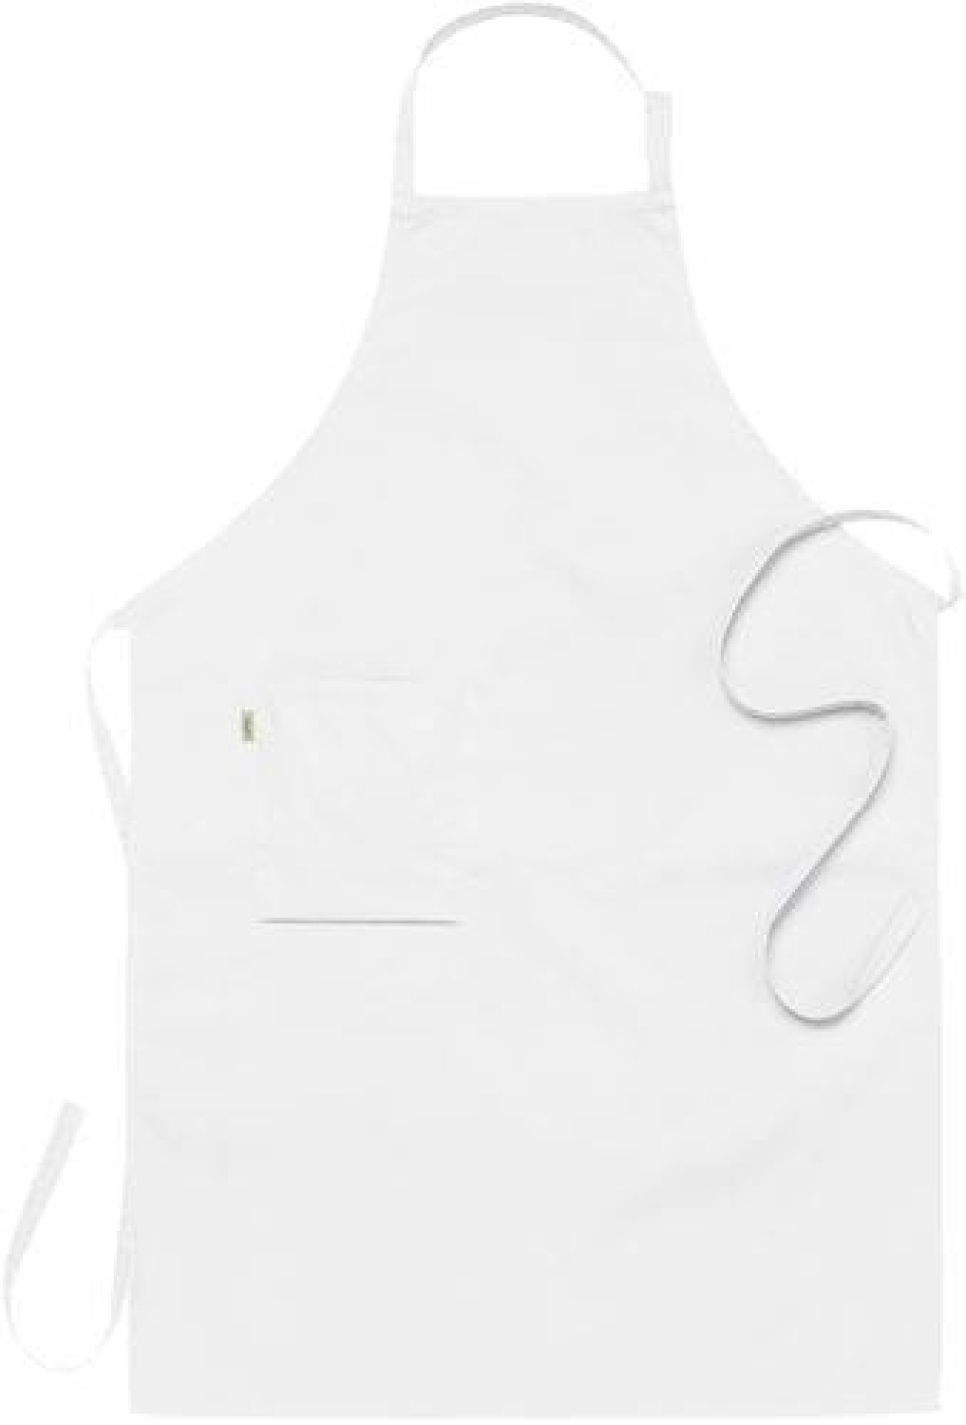 Bib apron, white 75 x 110 cm - Segers in the group Cooking / Kitchen textiles / The aprons at KitchenLab (1092-10846)